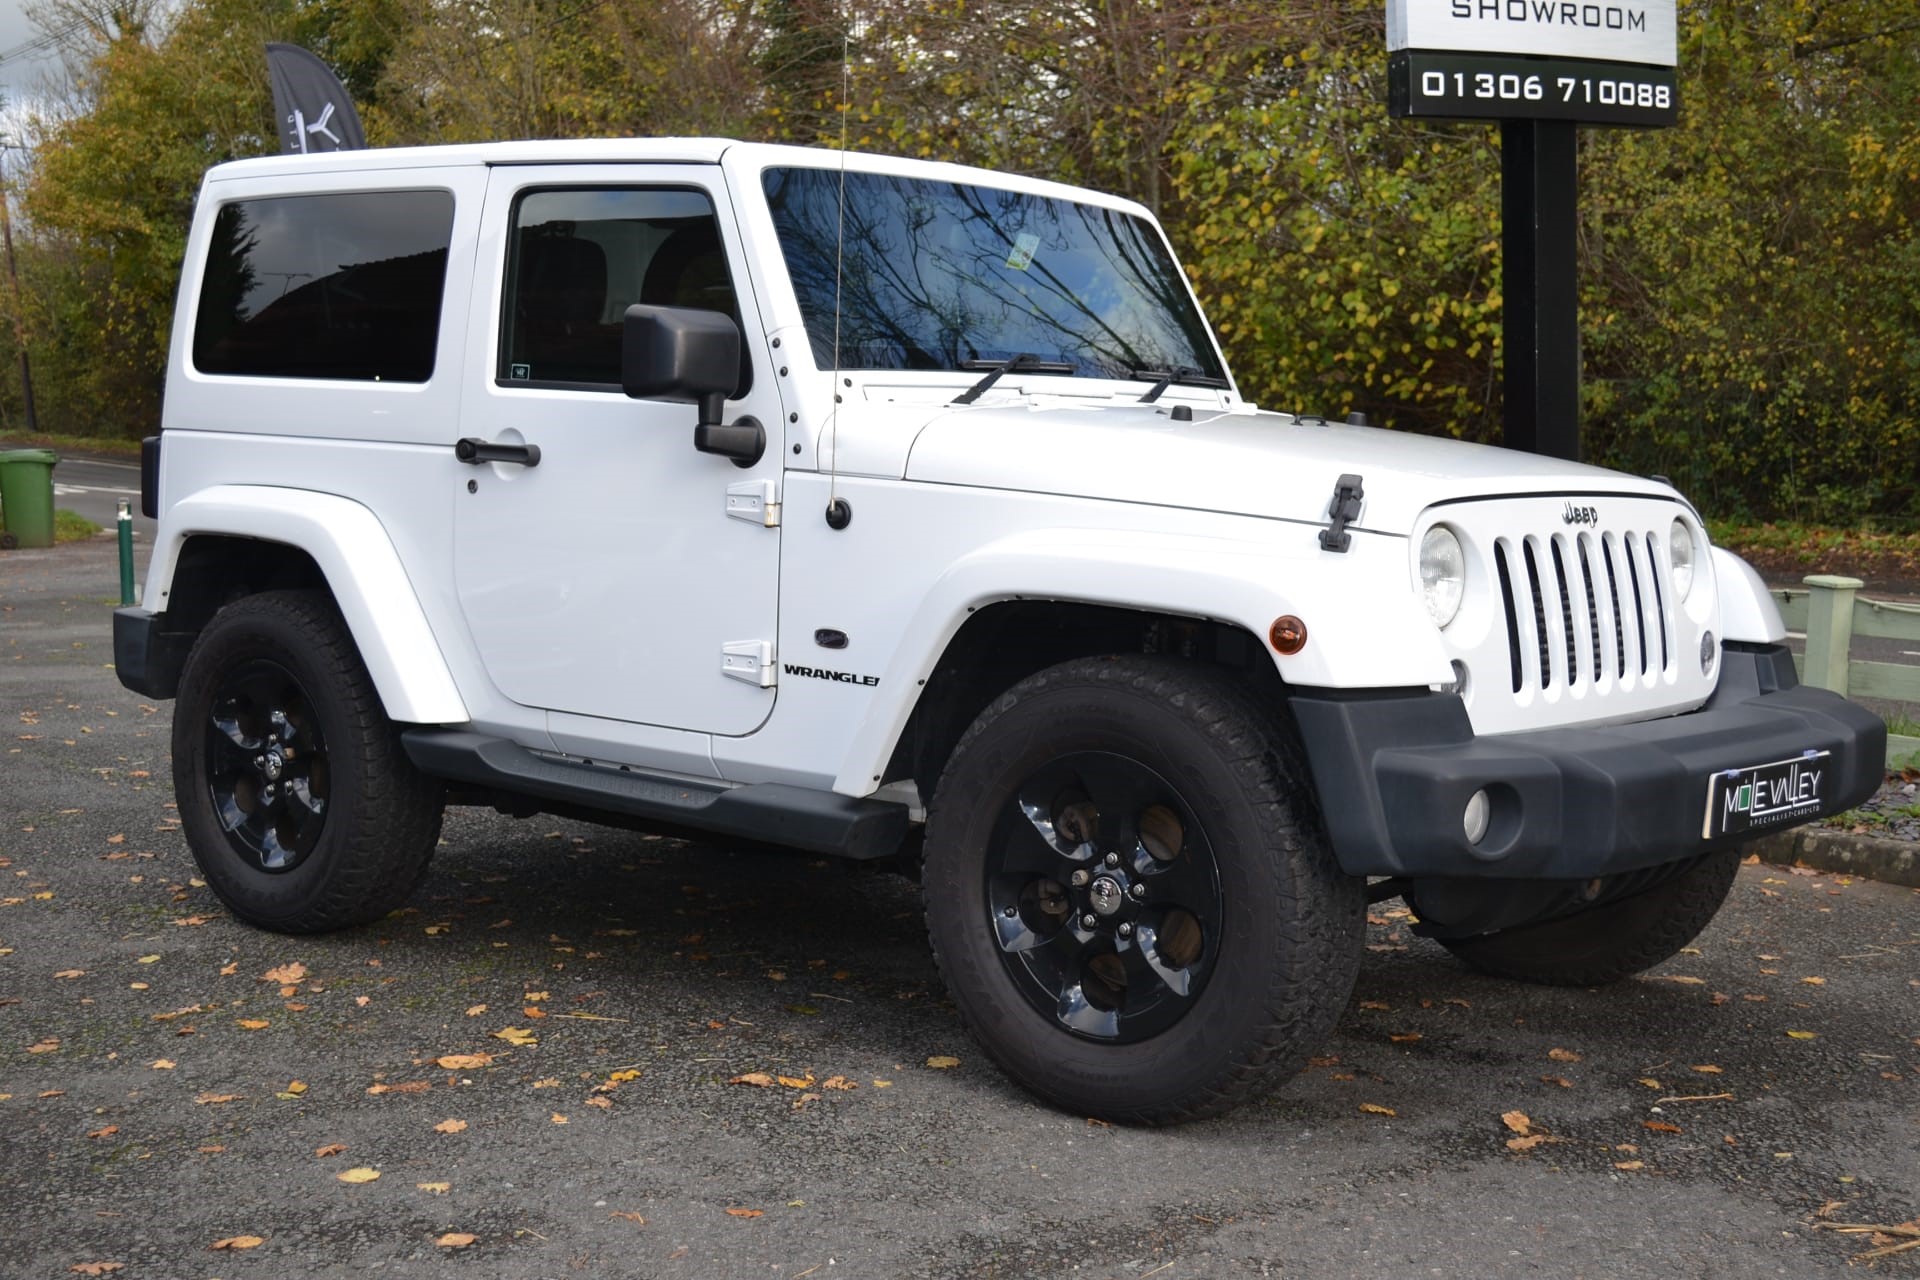 Used Jeep Wrangler for sale in Dorking, Surrey | Mole Valley Specialist  Cars Ltd